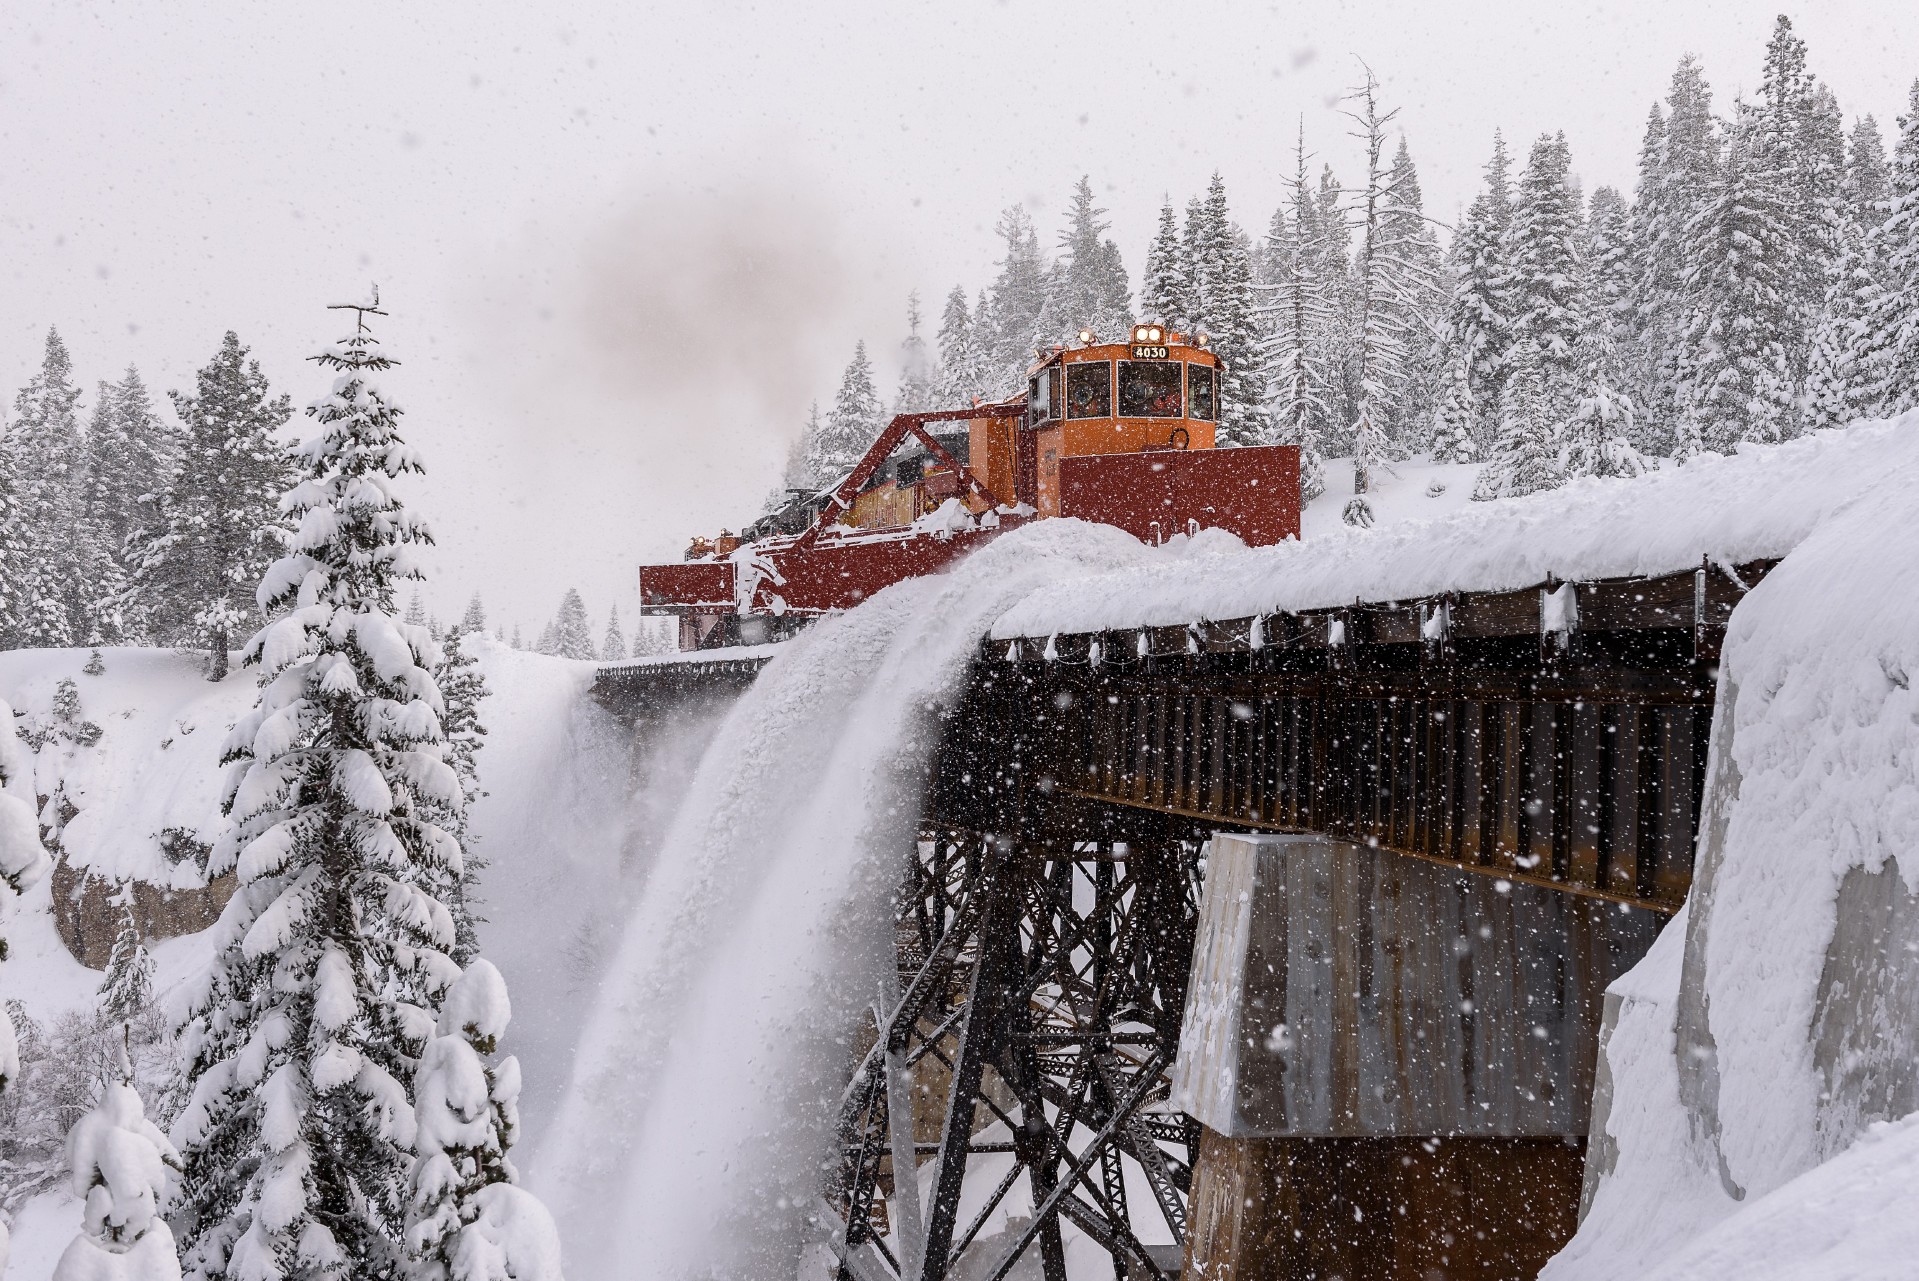 Plow Railroads and Winter Weather